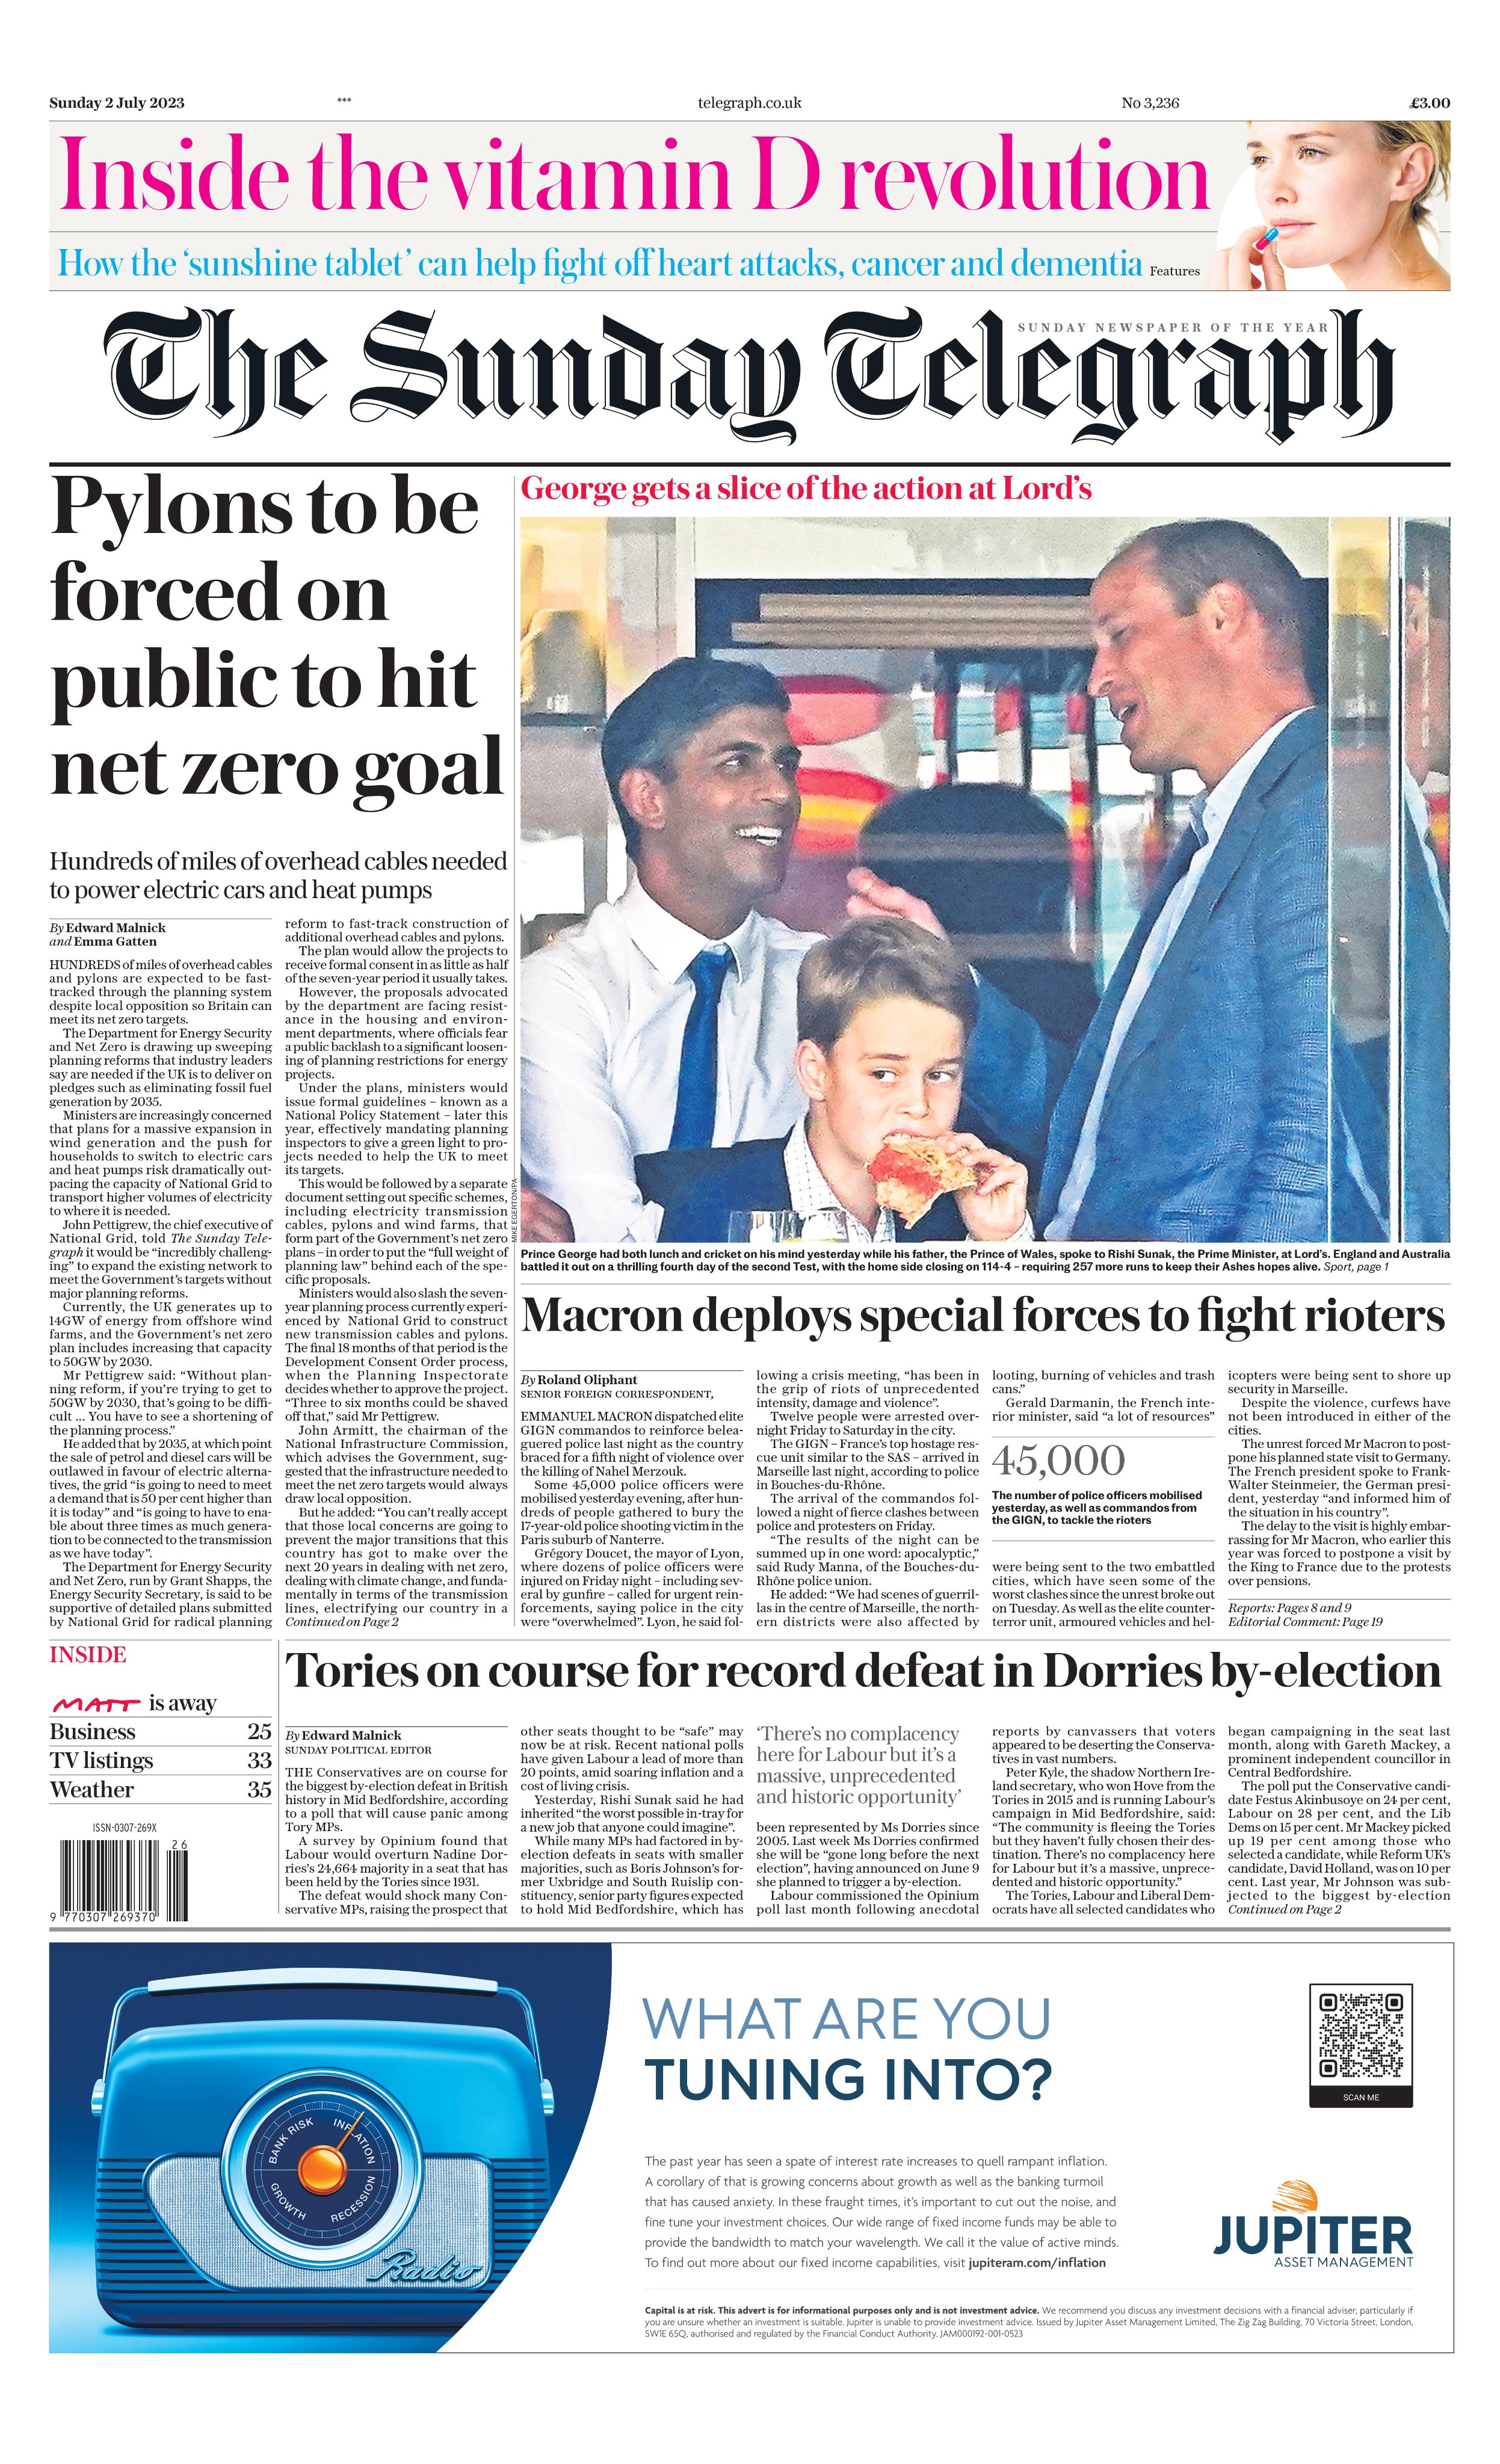 'Pylons to be forced on public to hit net zero goal', front page of The Sunday Telegraph, 2nd July, 2023